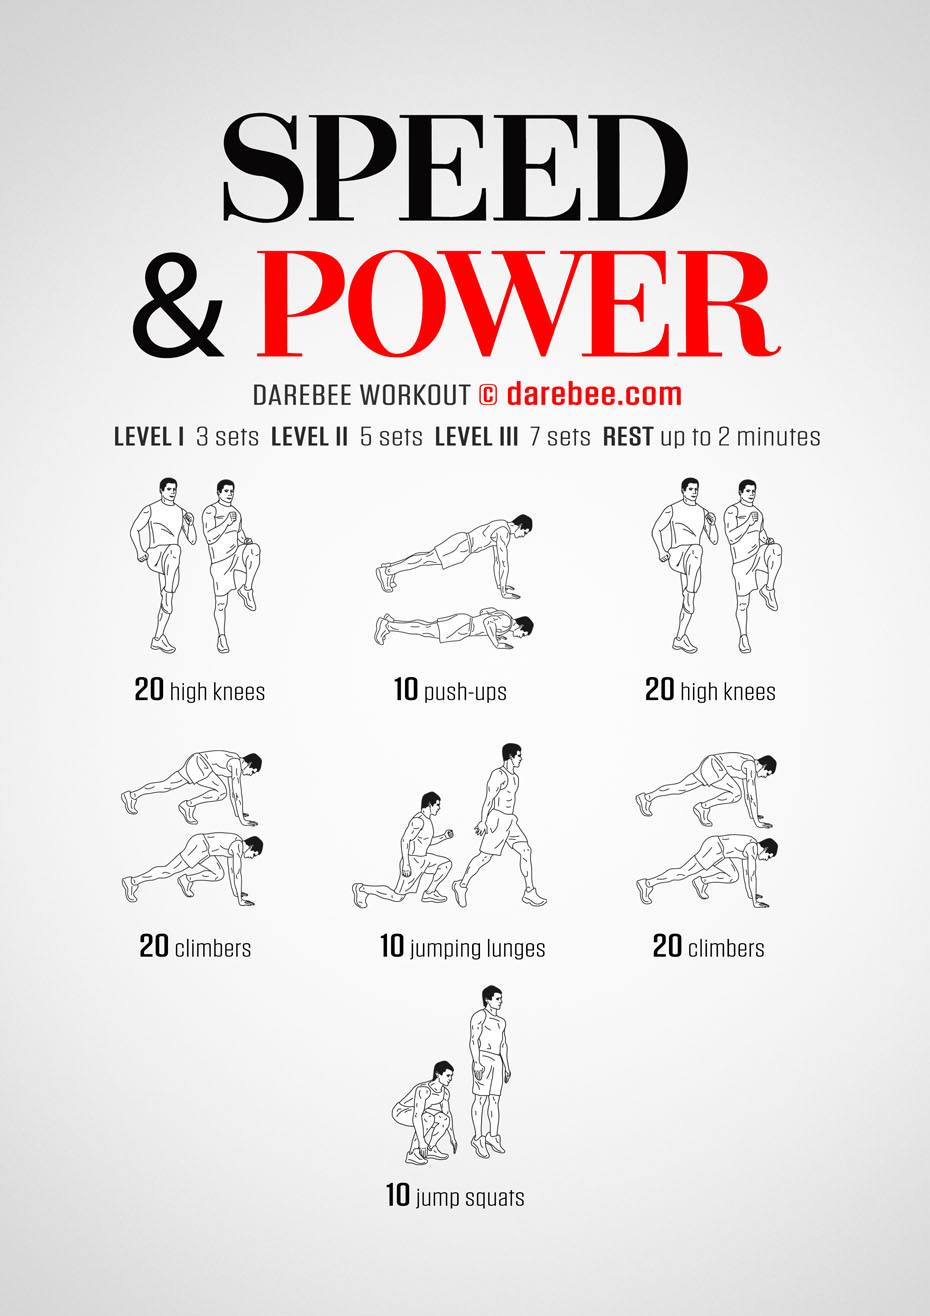 Speed & Power Workout